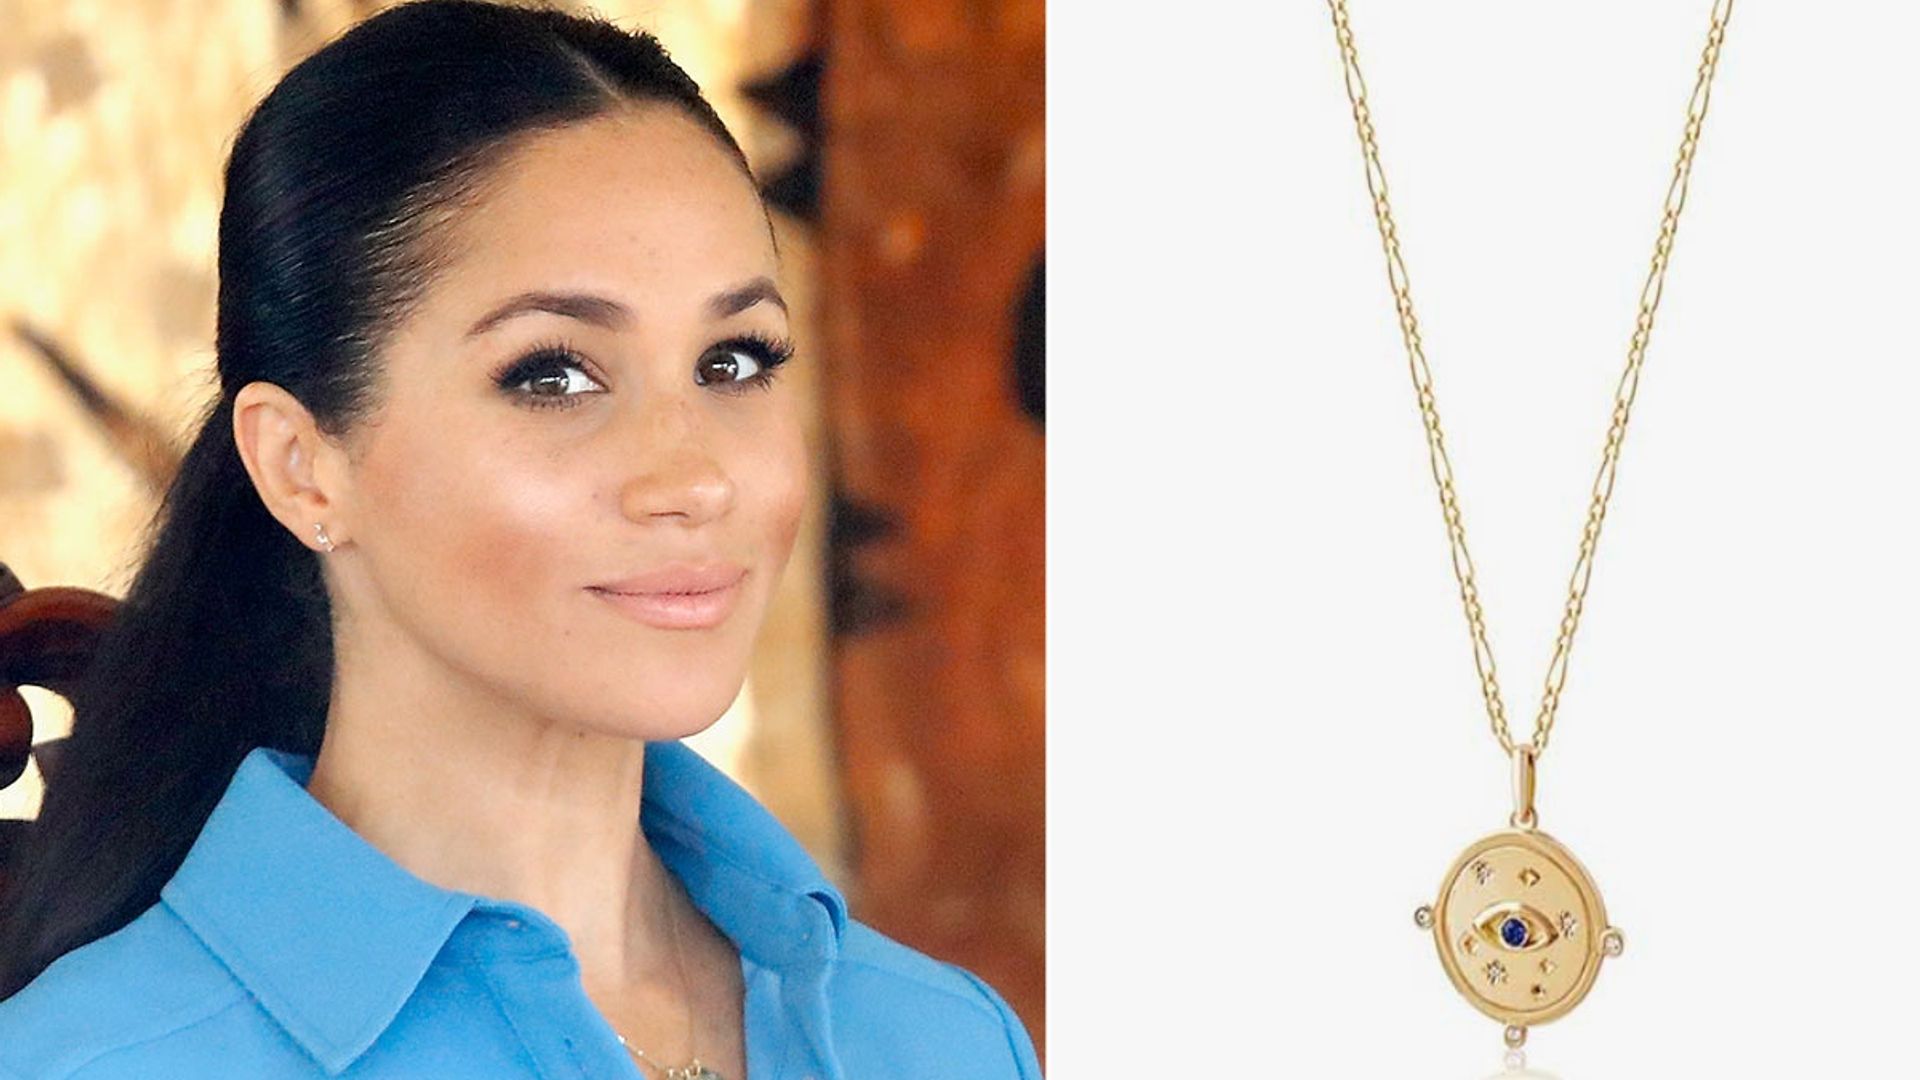 Meghan Markle's gorgeous new necklace has a very powerful meaning